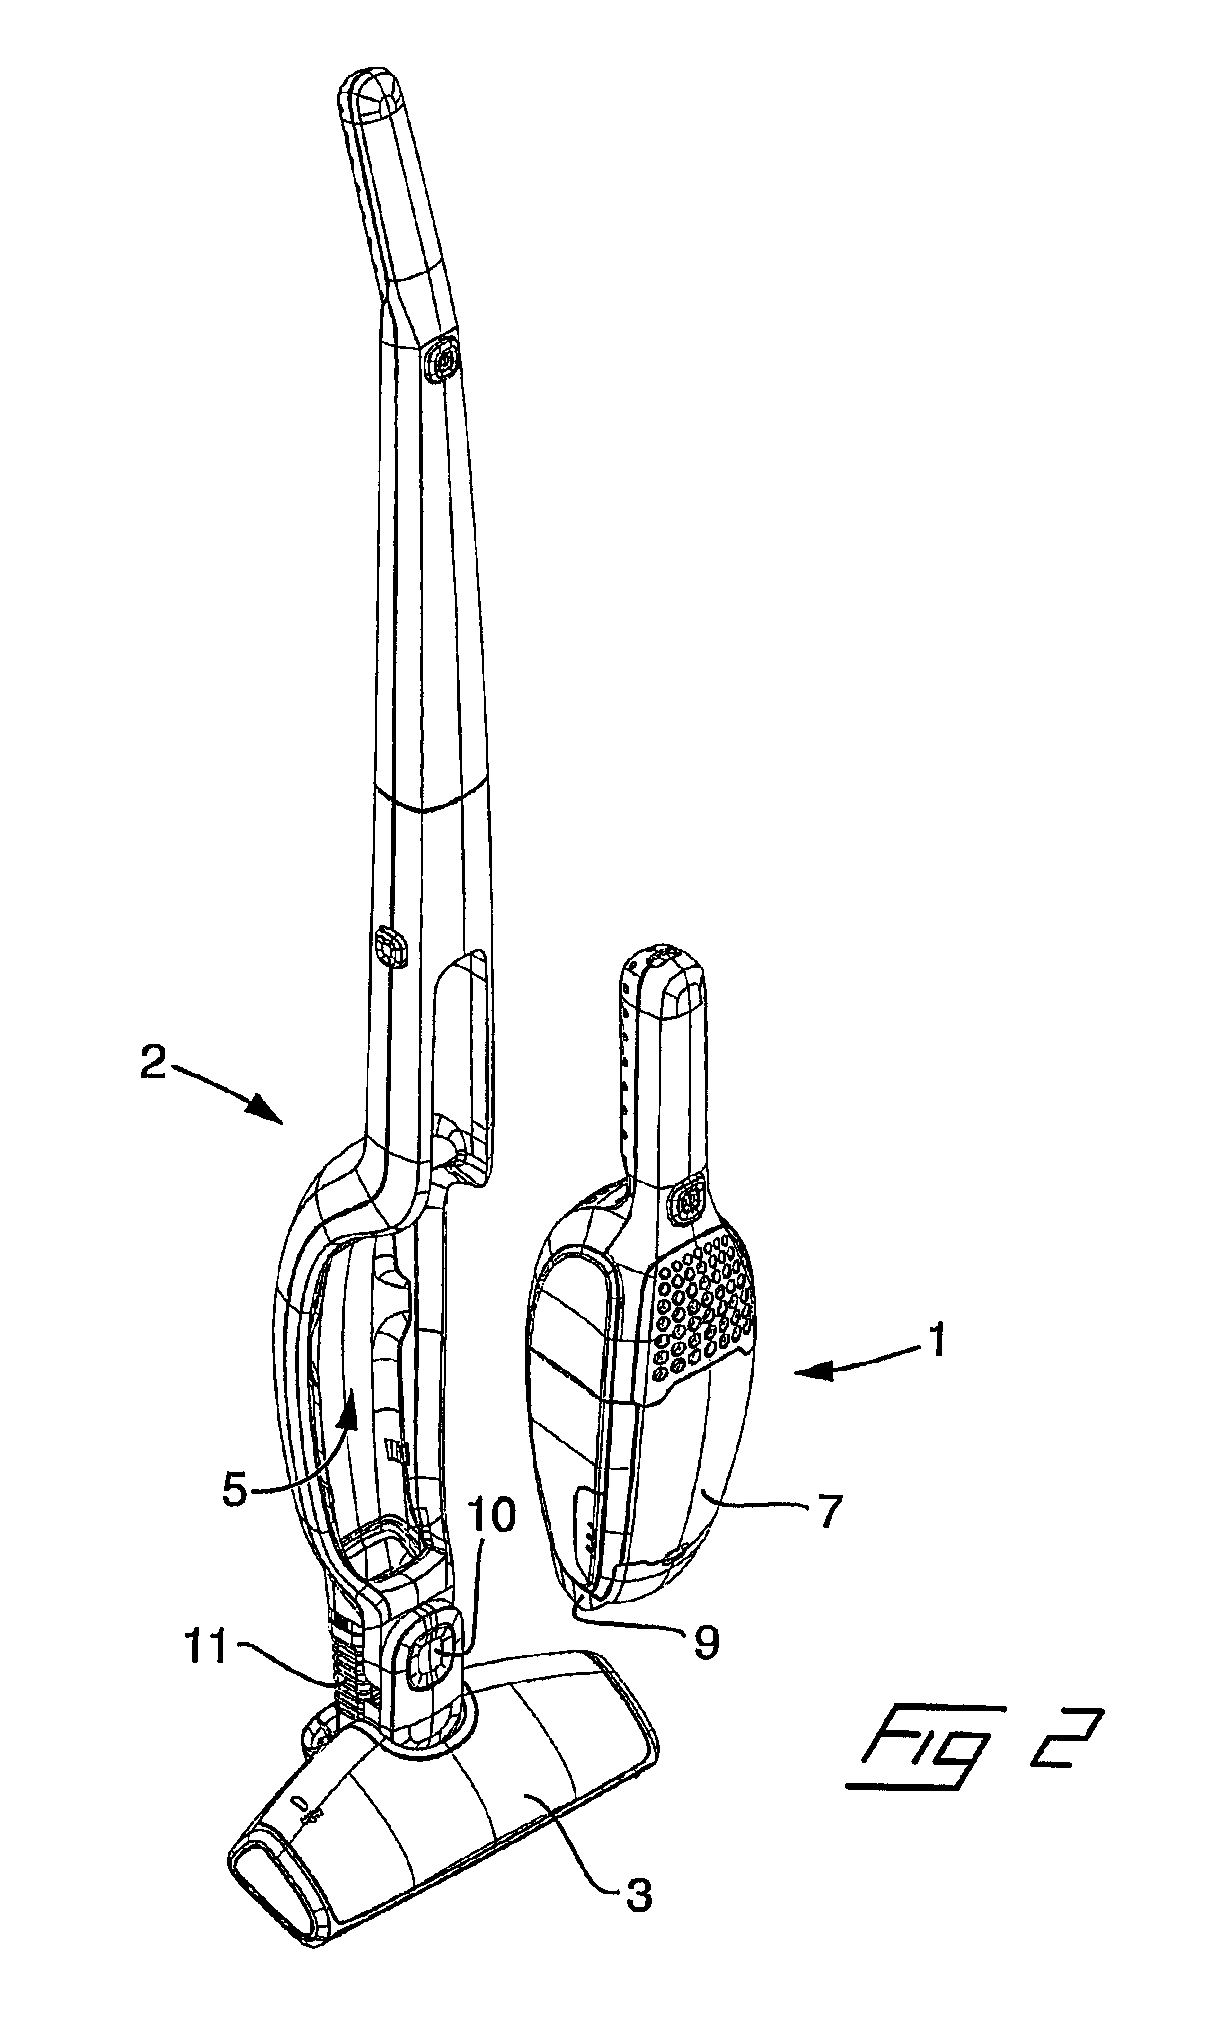 Dirt separator system for a vacuum cleaner